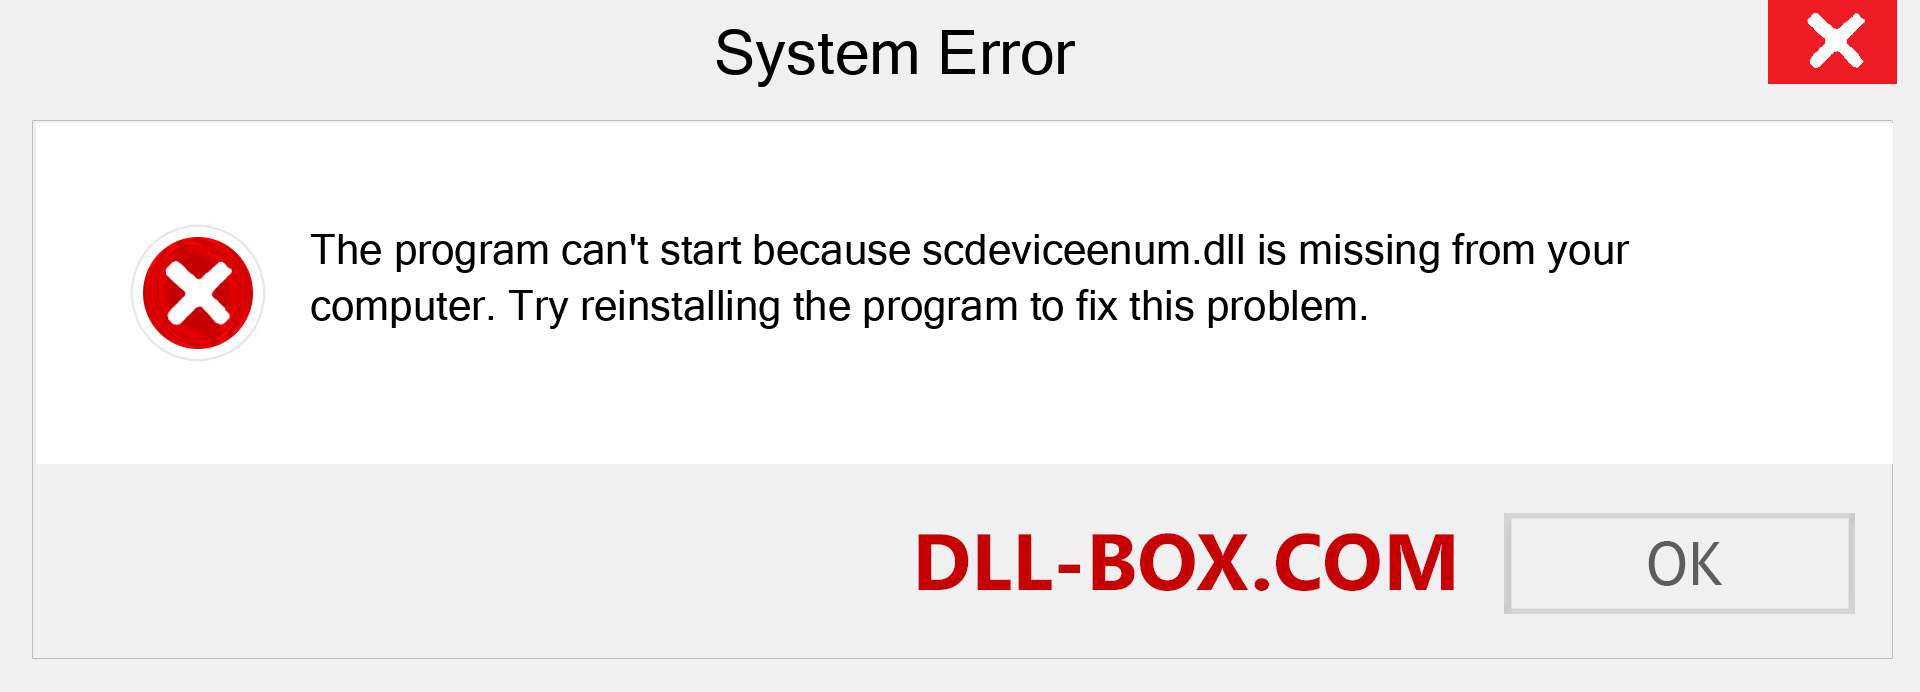  scdeviceenum.dll file is missing?. Download for Windows 7, 8, 10 - Fix  scdeviceenum dll Missing Error on Windows, photos, images